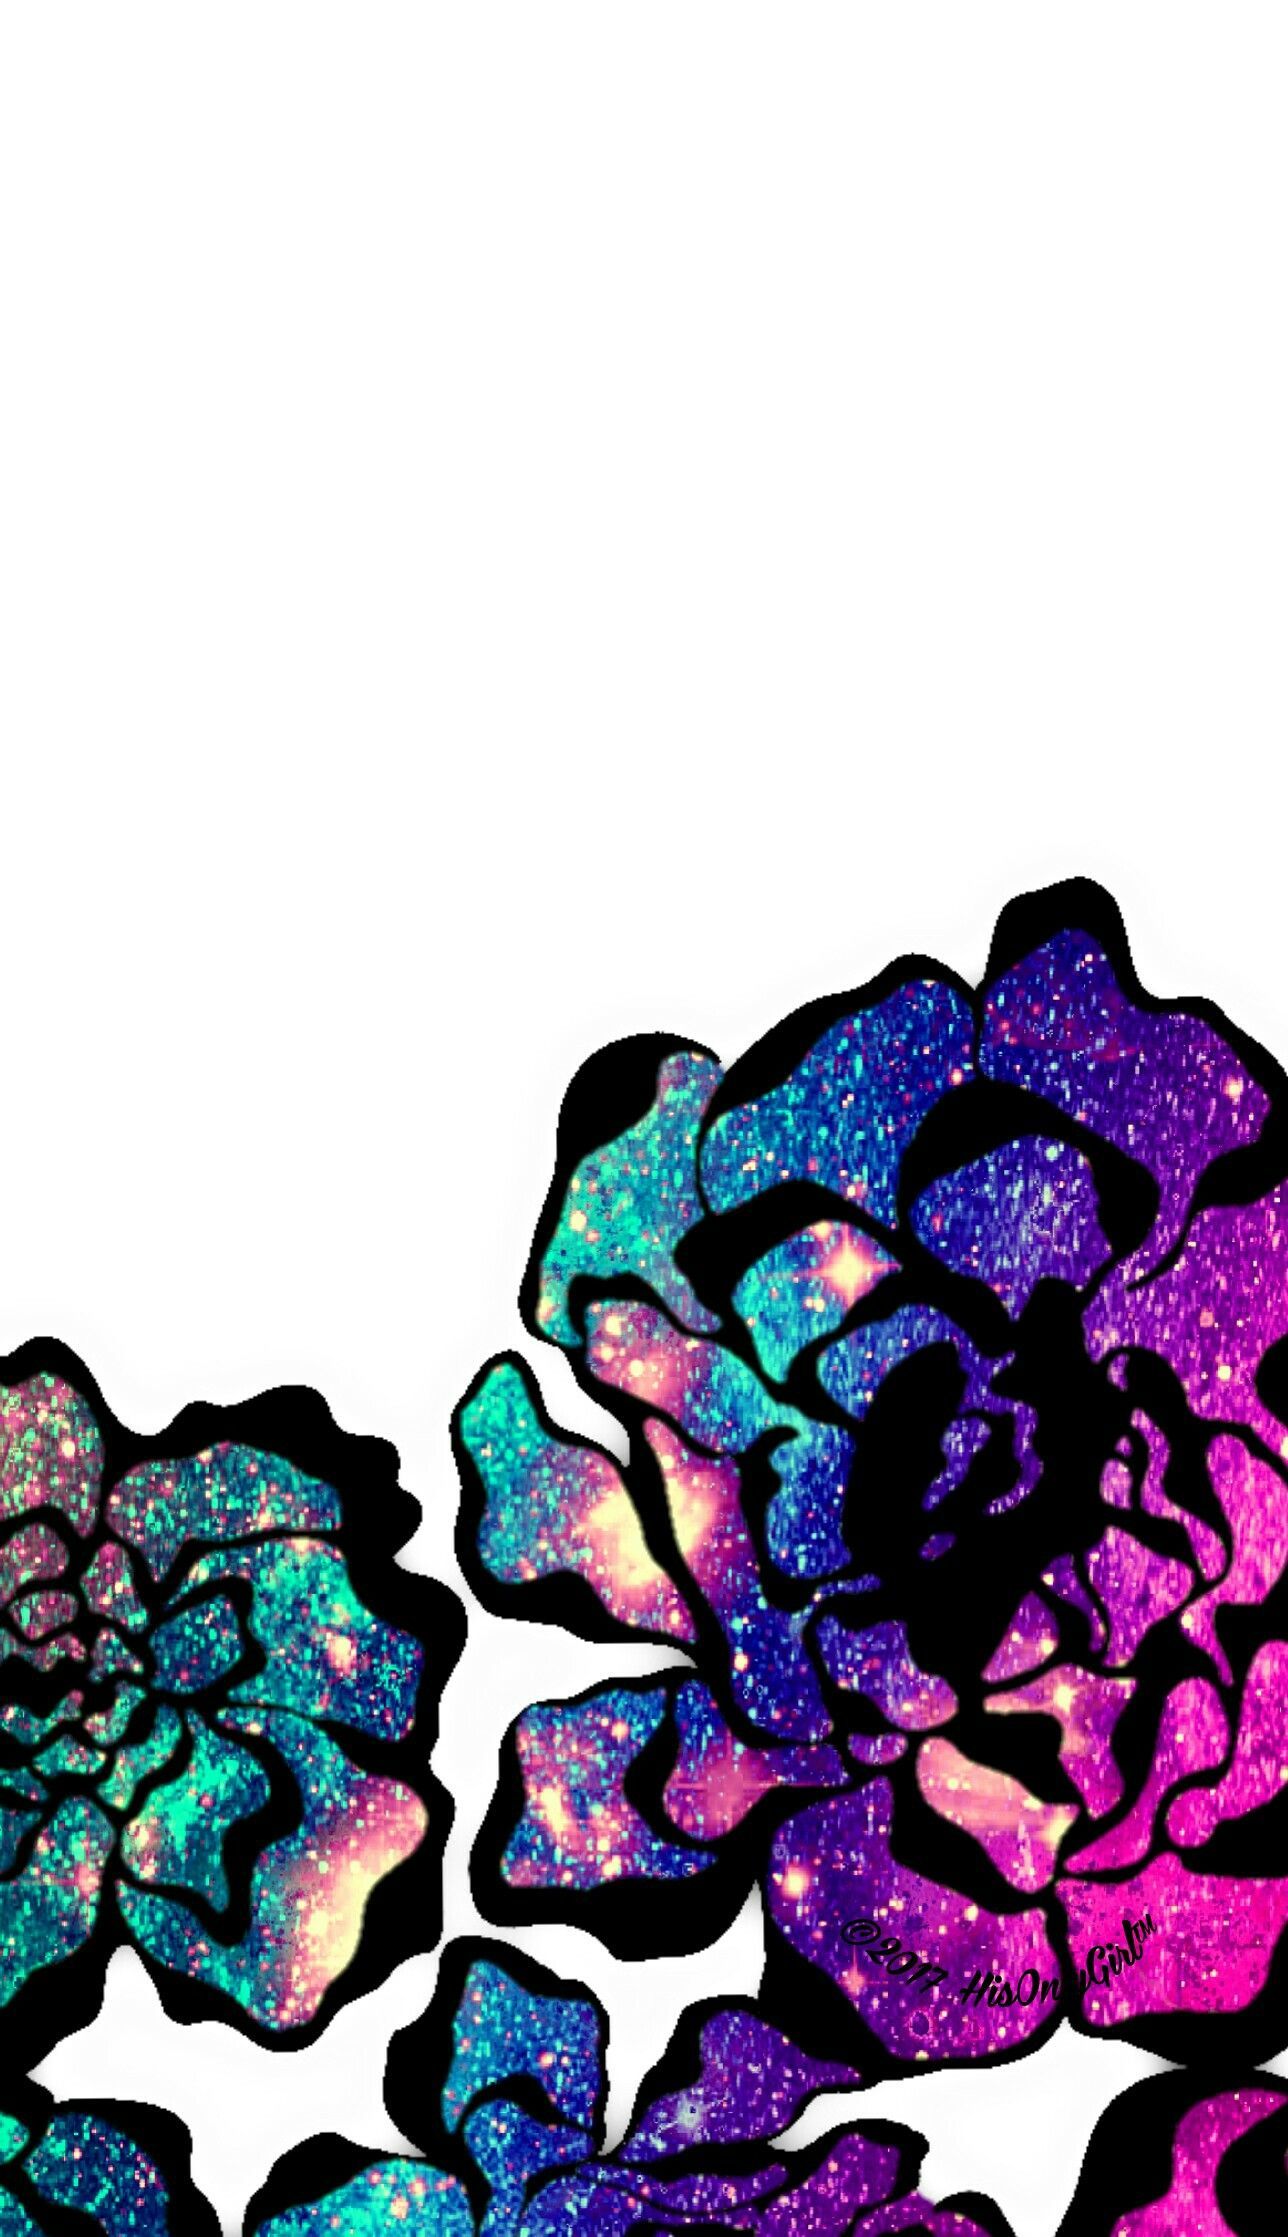 Galaxy flowers wallpaper I created for the app CocoPPa!. Galaxy flowers, Flower wallpaper, Star wallpaper